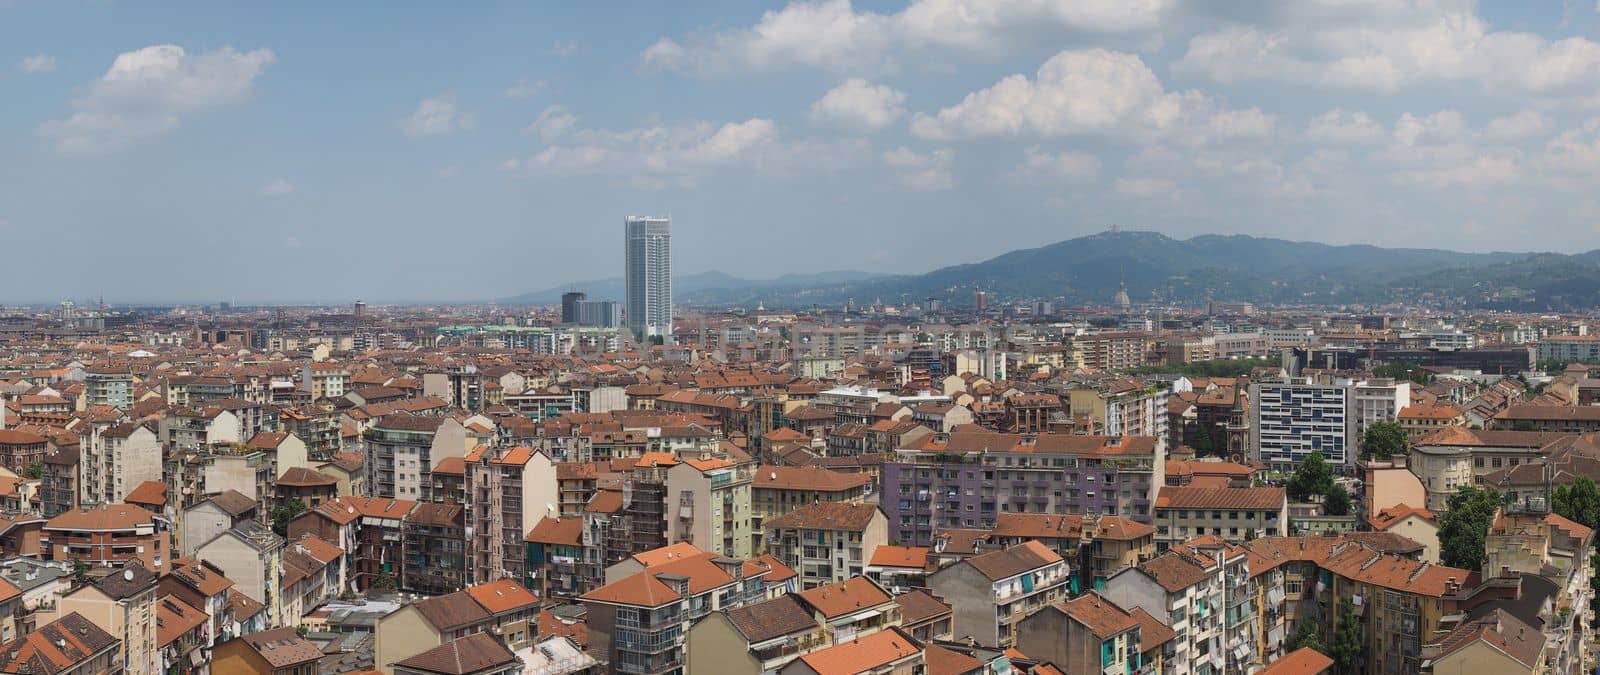 Aerial view of Turin by claudiodivizia